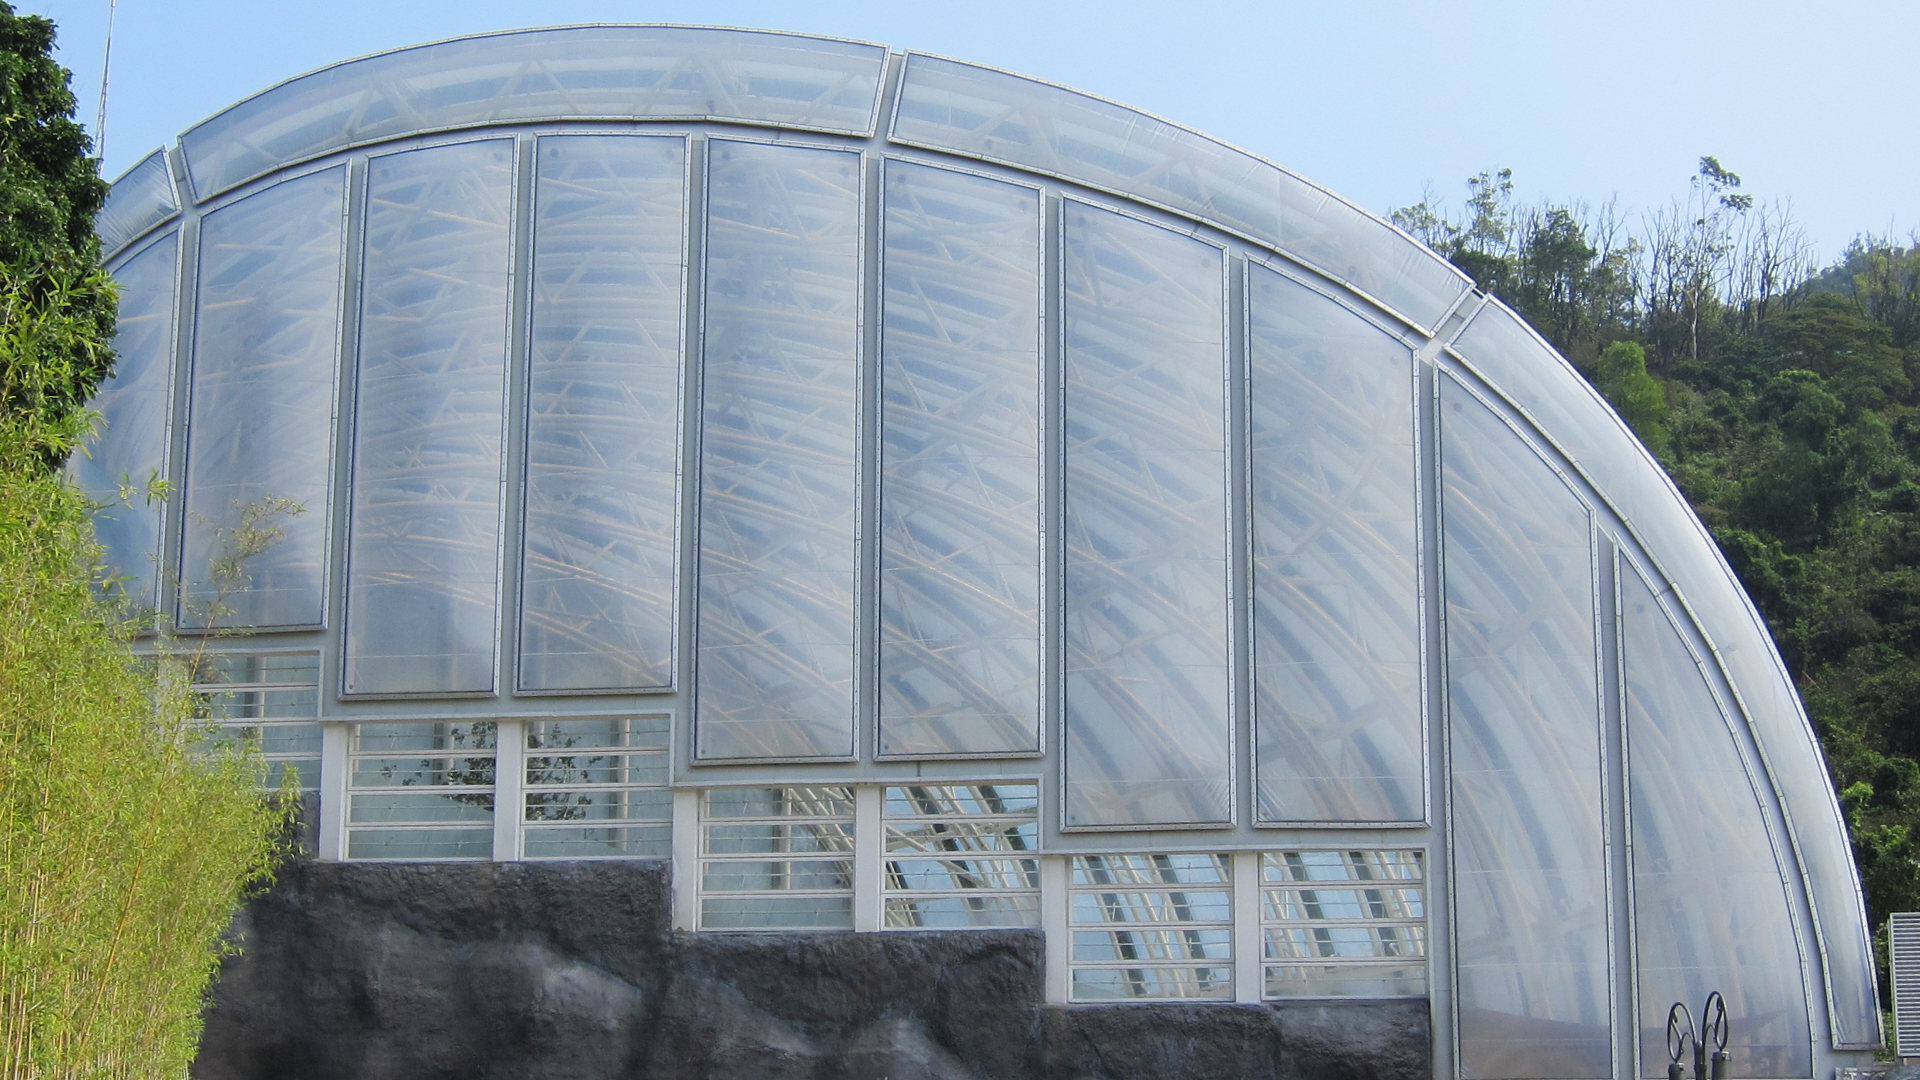 Texlon® ETFE foils are incredibly transparent and allow high levels of light transmission into buildings. 